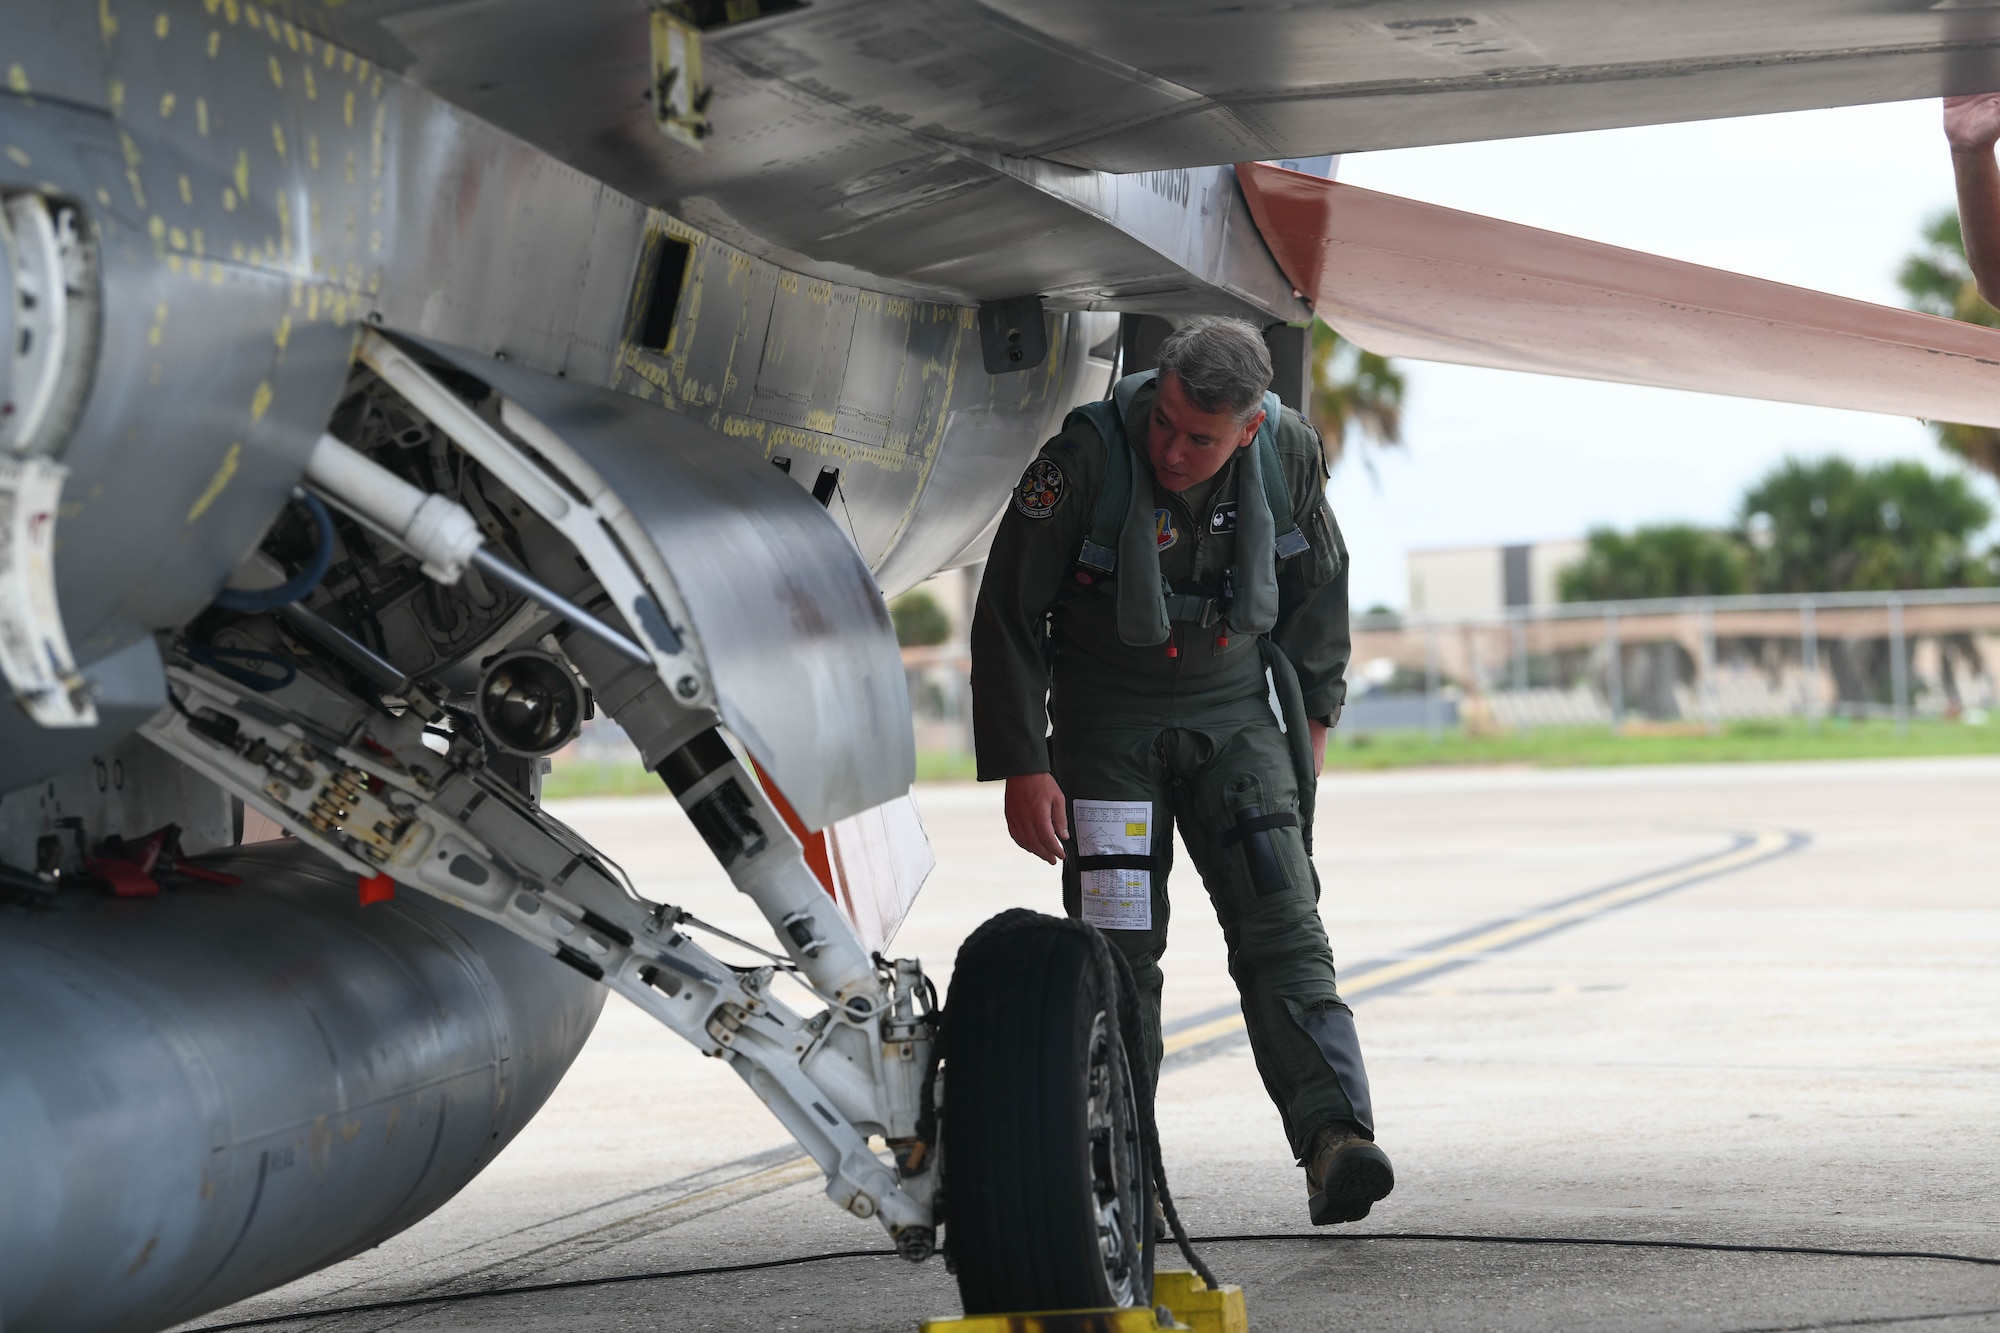 U.S. Air Force Col. Nicholas Reed with the 53rd Weapons Evaluation Group, commander, performs pre-flight checks of a QF-16 before takeoff at Tyndall Air Force Base, Florida, Aug. 21, 2020. The unit evacuated multiple aircraft to from the 325th Fighter Wing’s airfield to Shaw Air Force Base, South Carolina, for safe haven from severe weather conditions. (U.S. Air Force photo by Airman Anabel Del Valle)